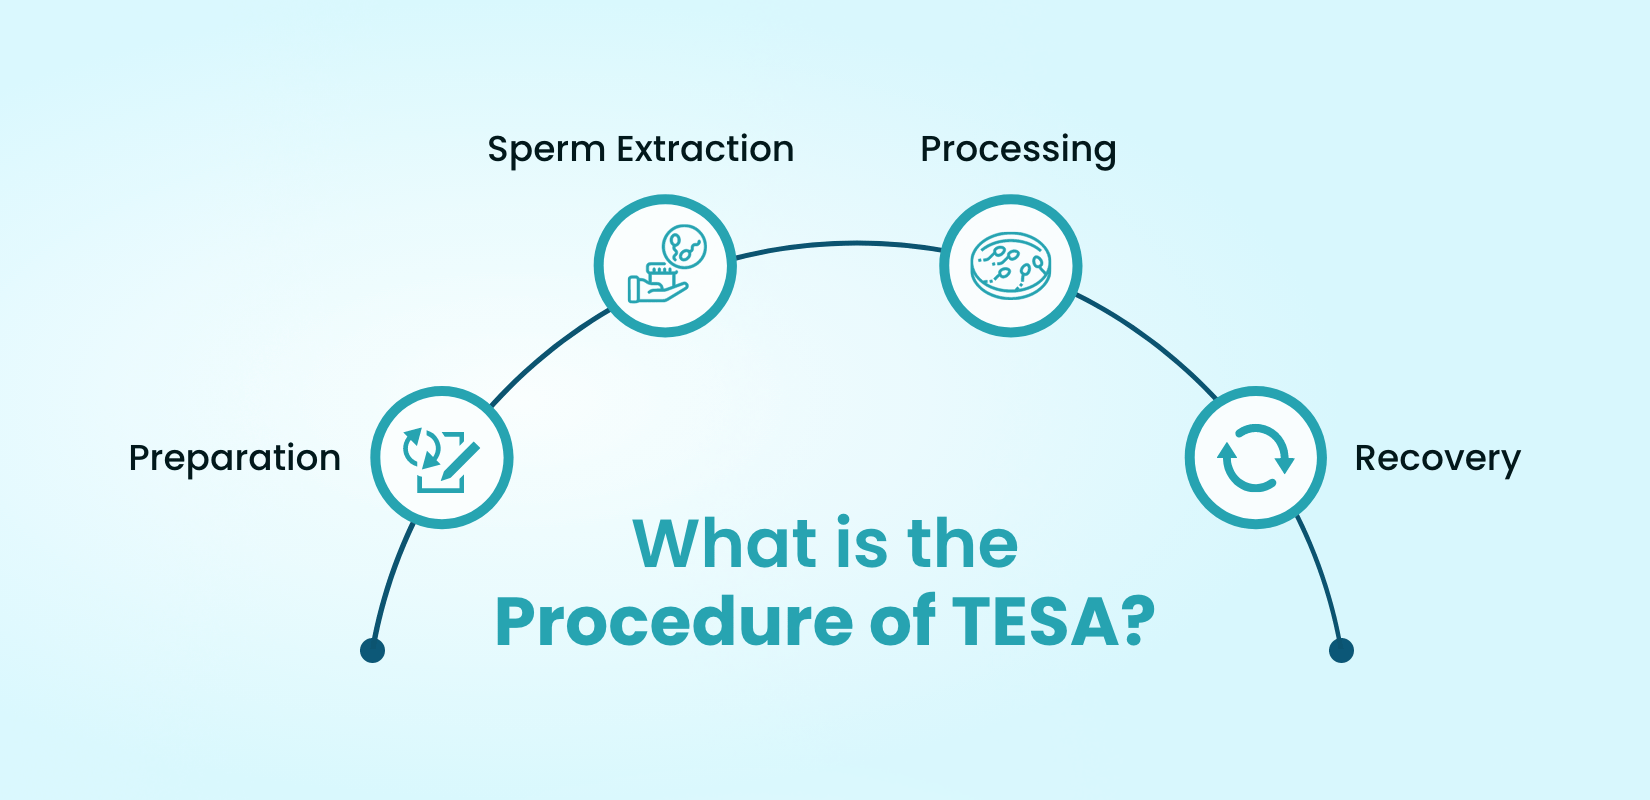 What is the Procedure of TESA?